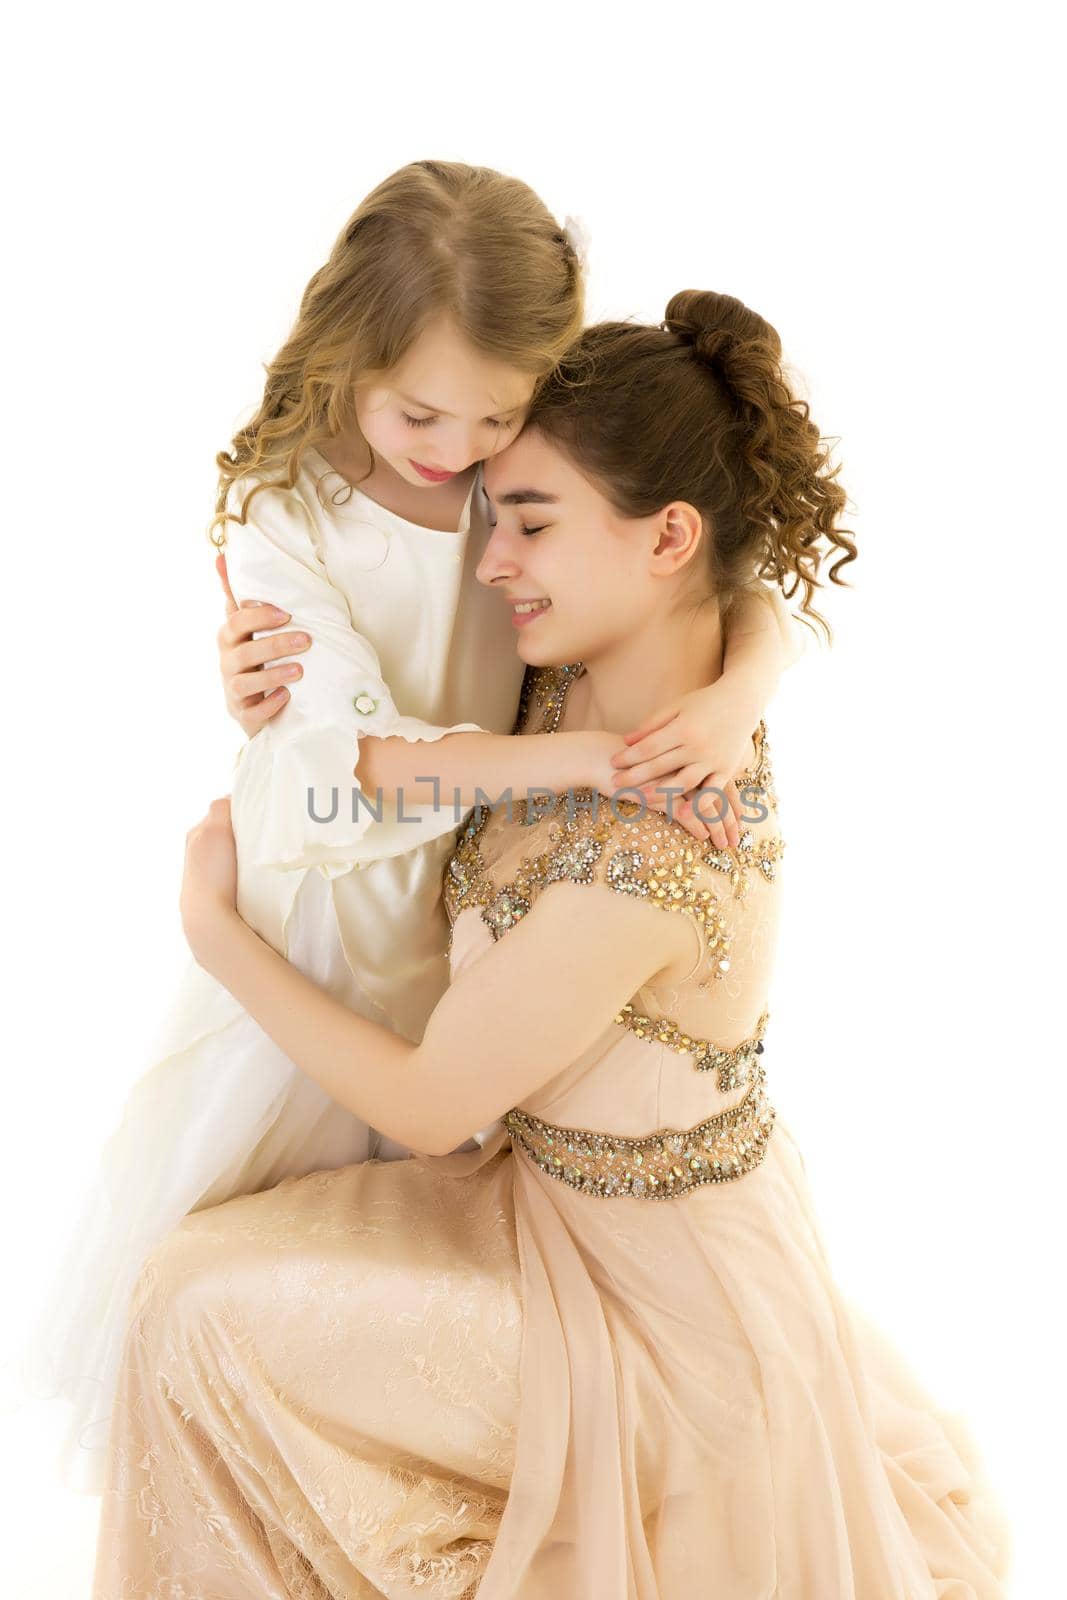 Beautiful young girl hugging her little sister. The concept of a happy childhood, family values. Isolated on white background.